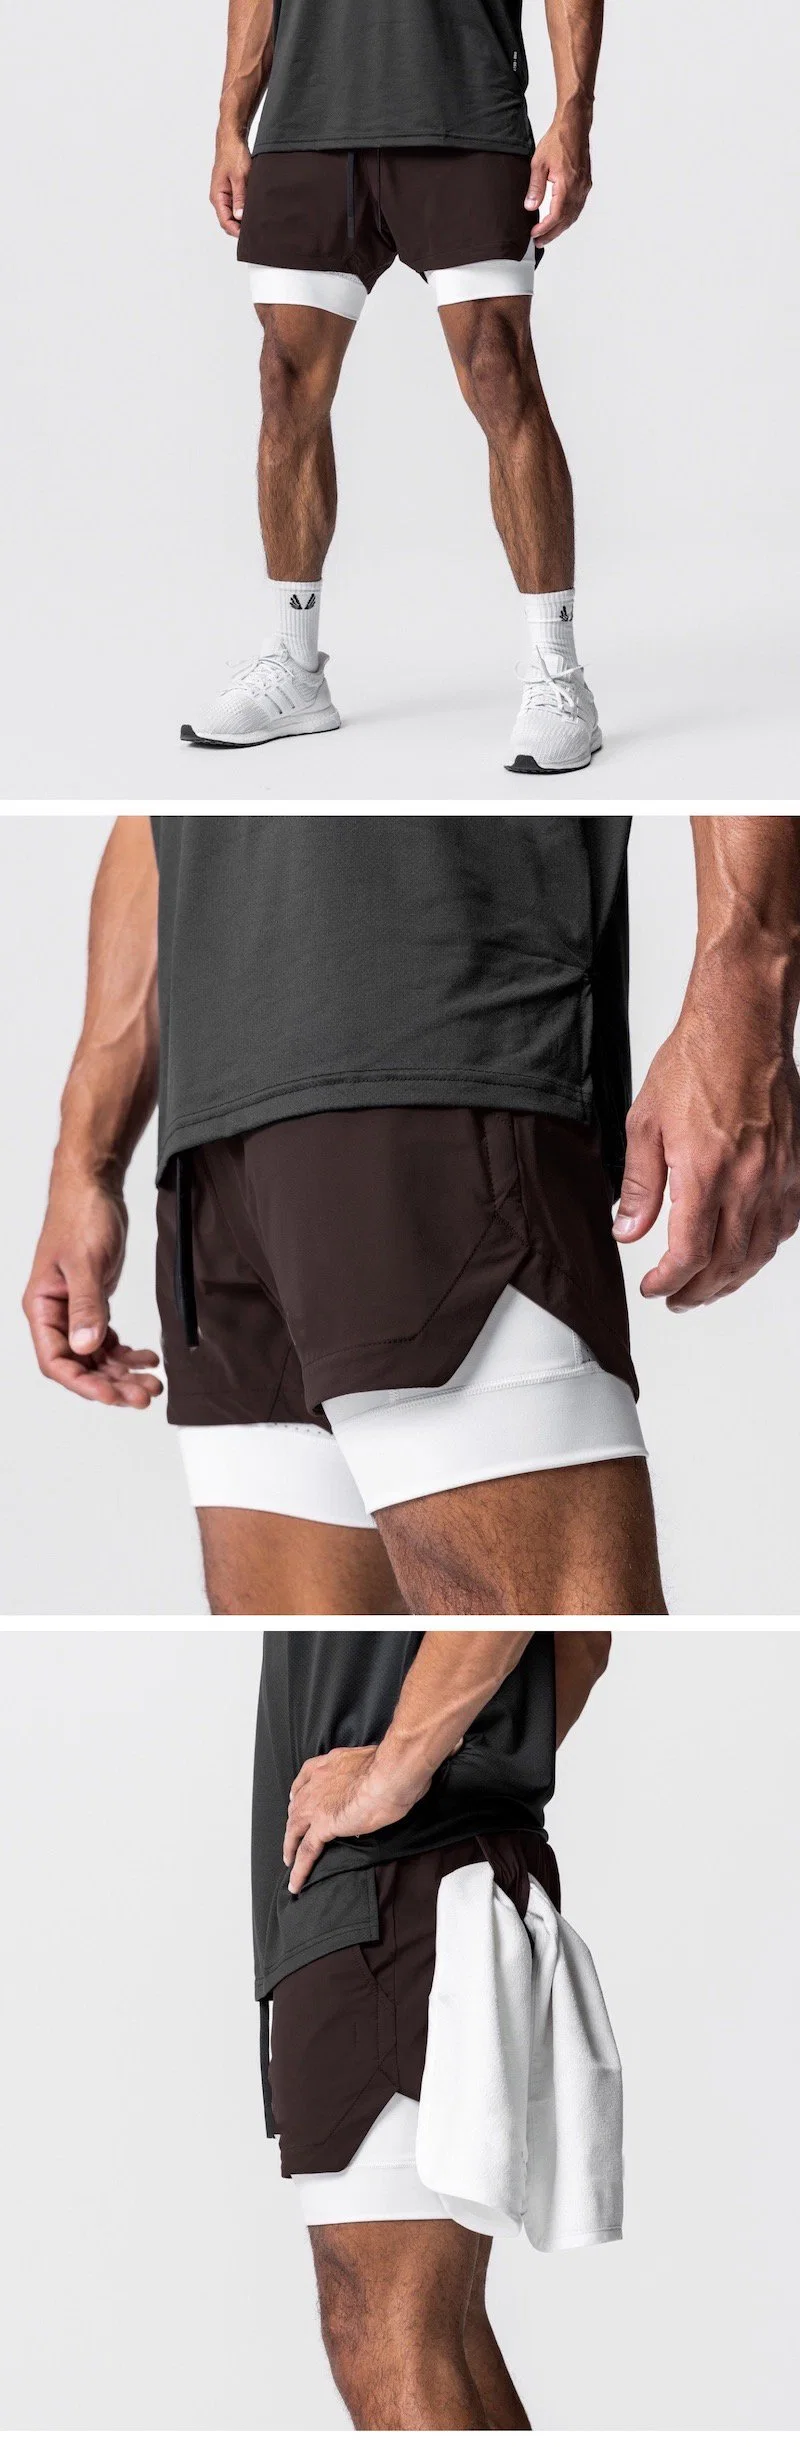 Hot Selling Two Layers Fast Dry Zip Pocket Running Shorts for Men, 2 in 1 Athletic Tennis Short Pants with Multi Pockets + Towel Loop Gym Workout Bottom Wear